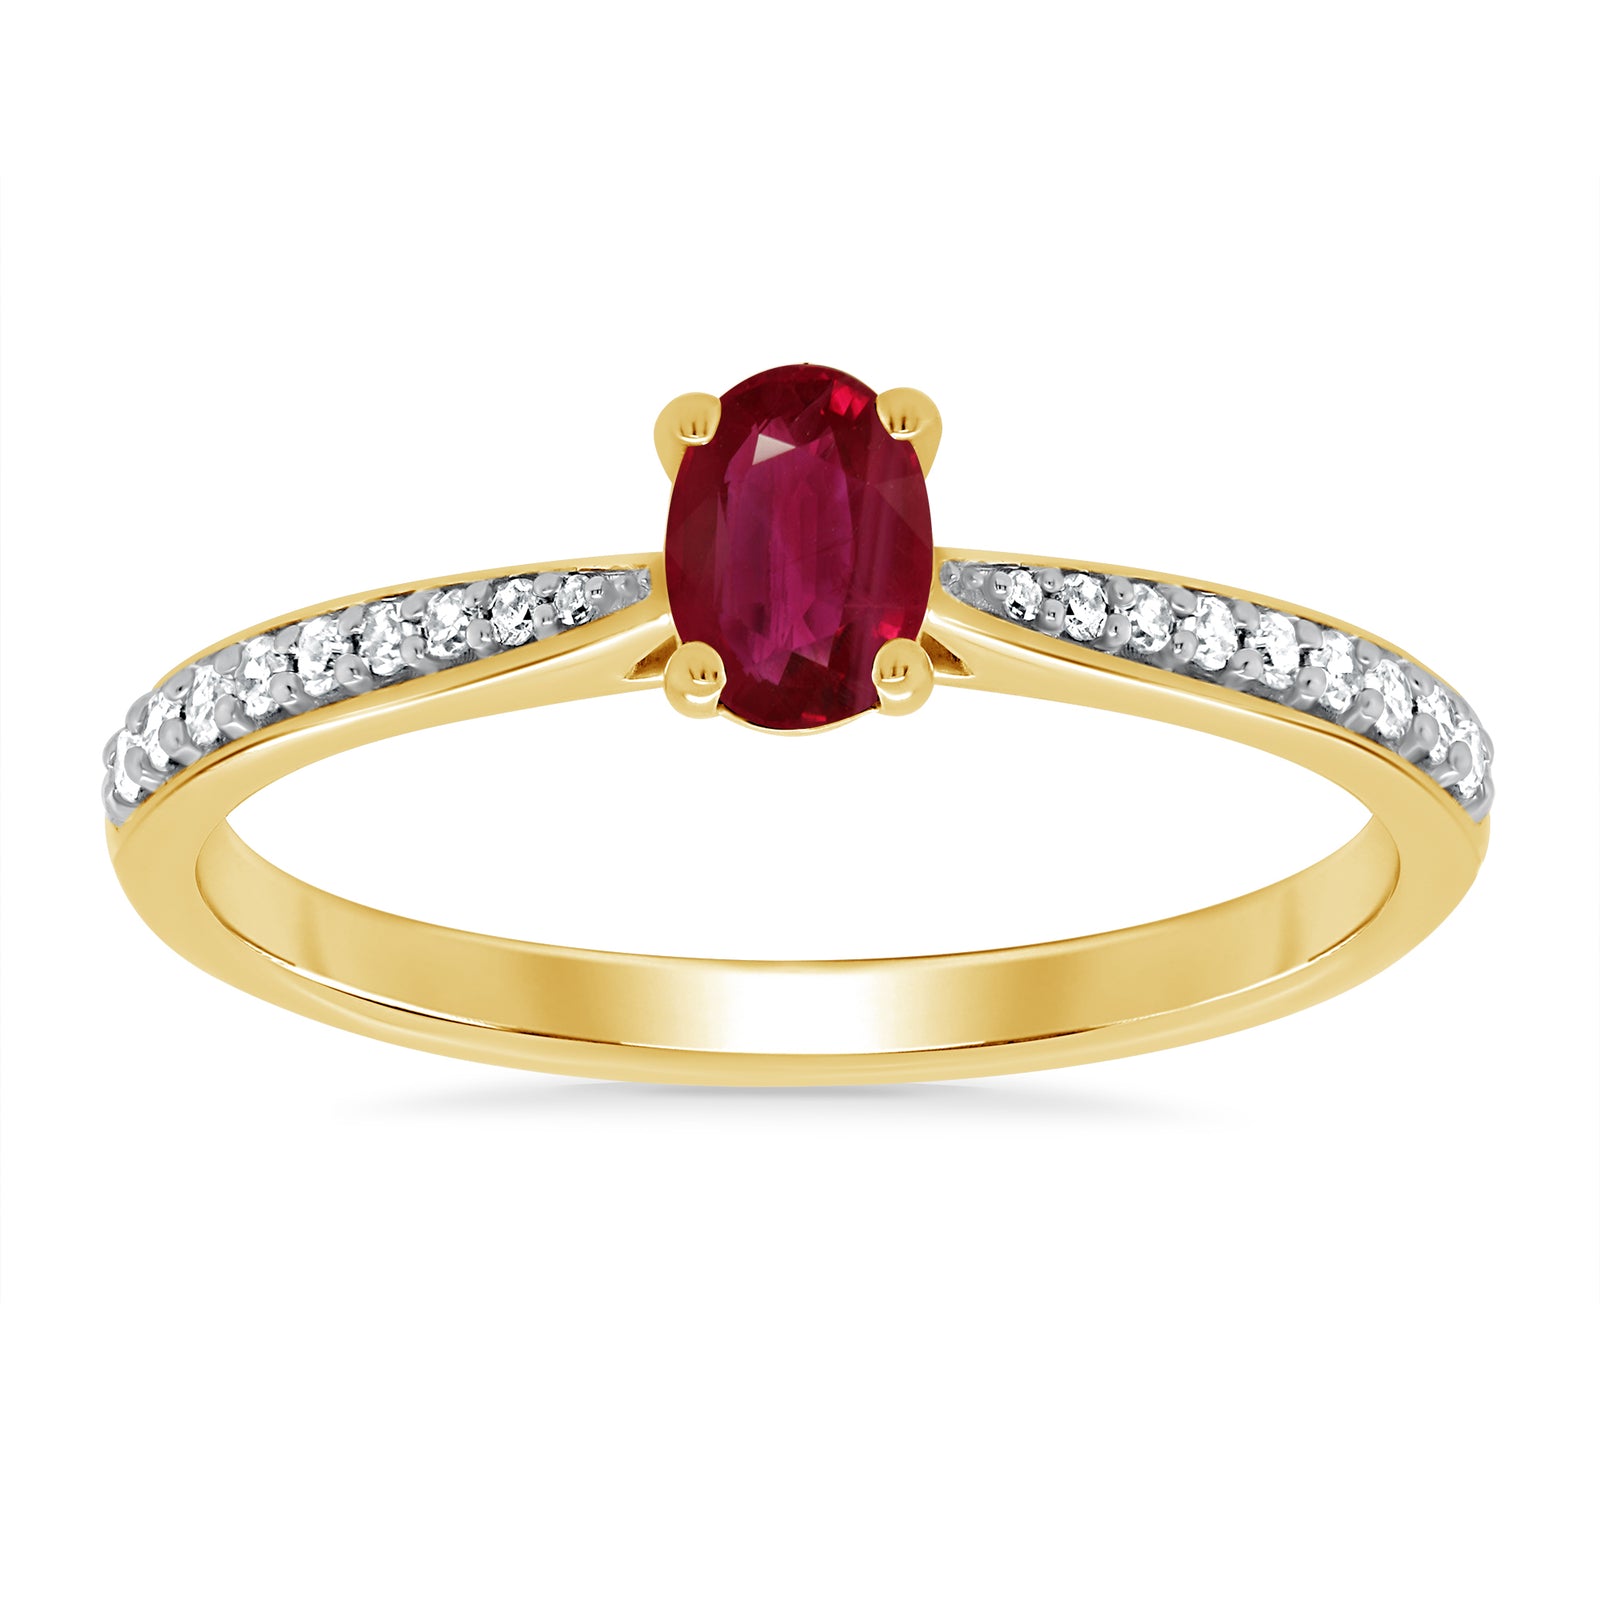 9ct gold 6x4mm oval ruby & diamond set shoulders ring 0.12ct